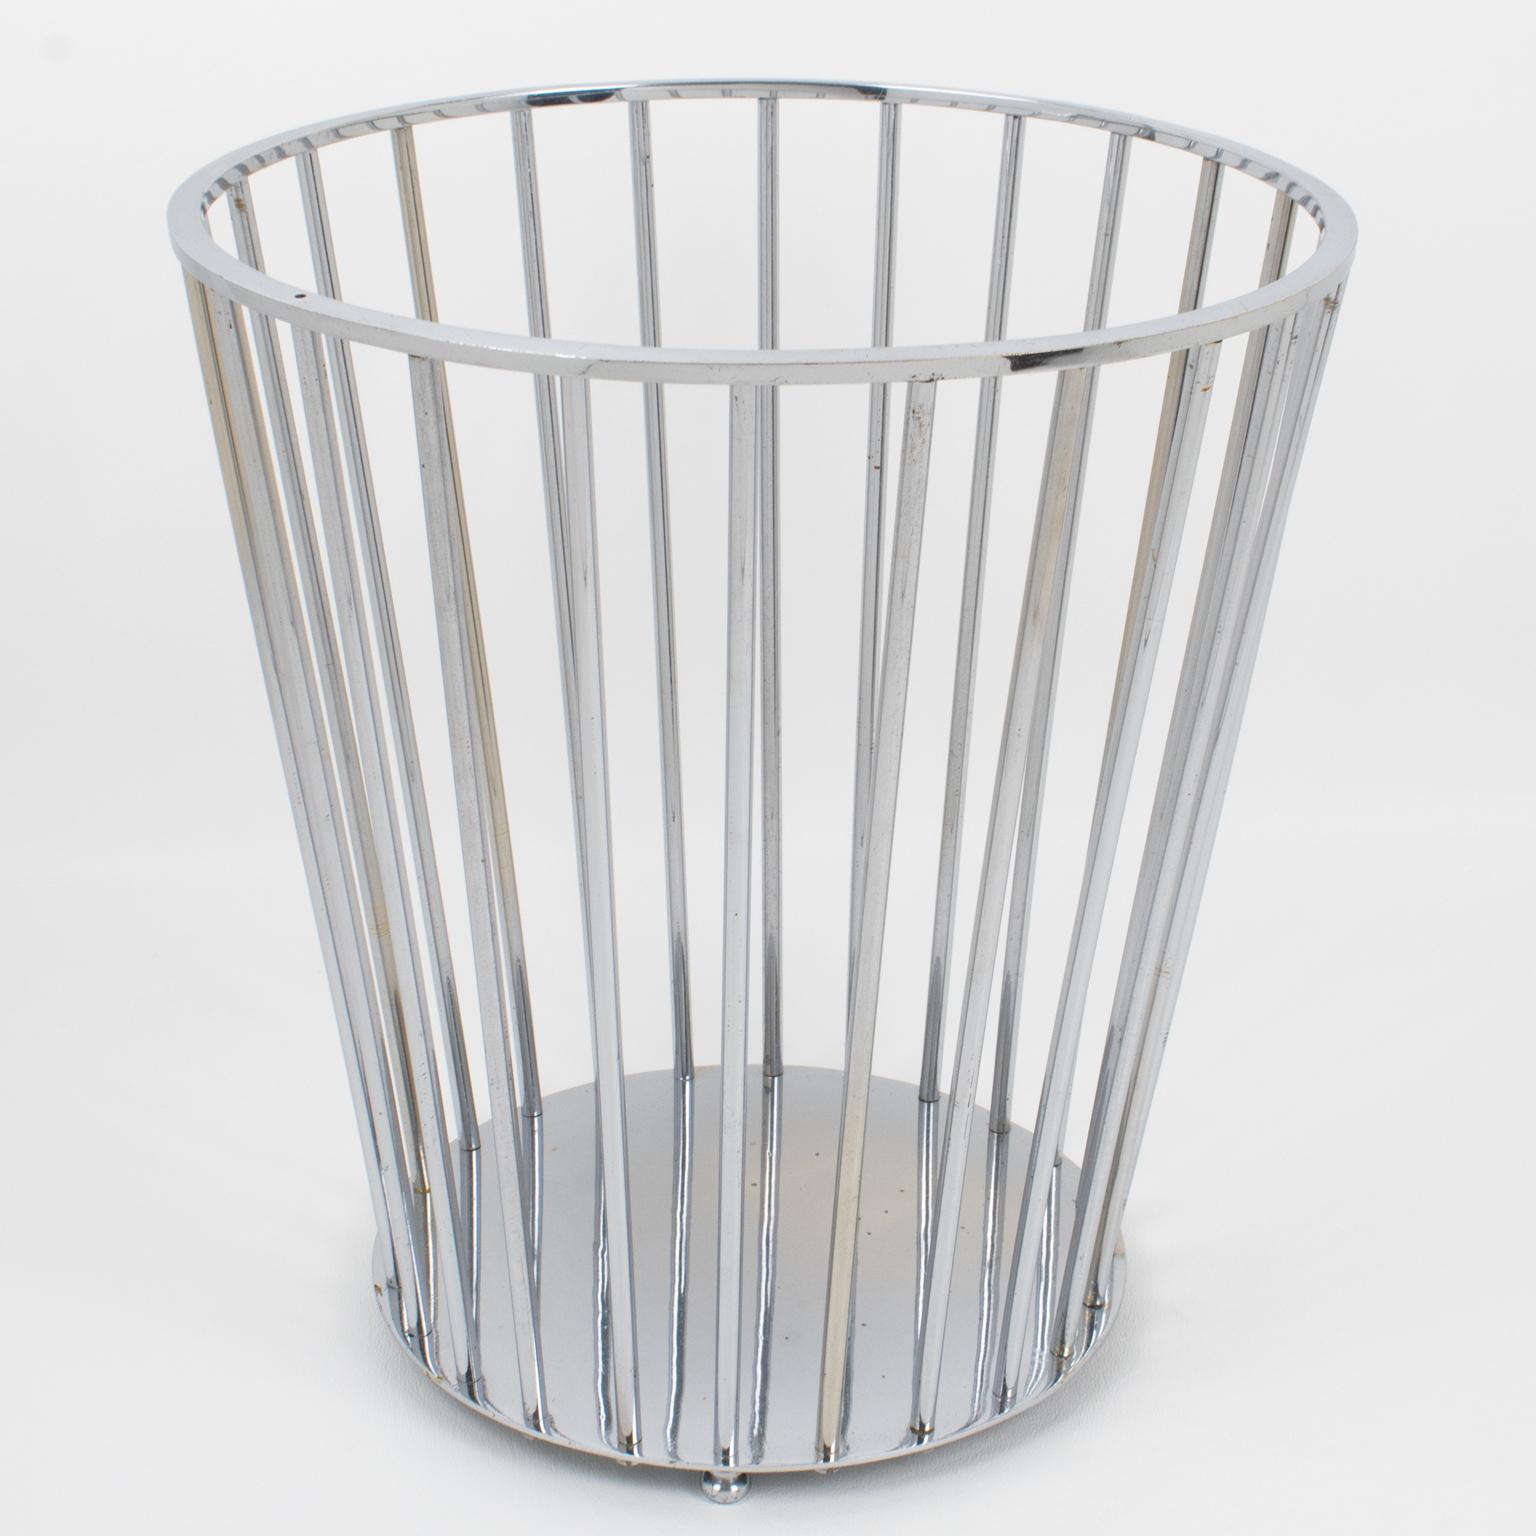 Jacques Adnet Art Deco Chrome Desk Accessory Office Waste Paper Basket In Good Condition For Sale In Atlanta, GA